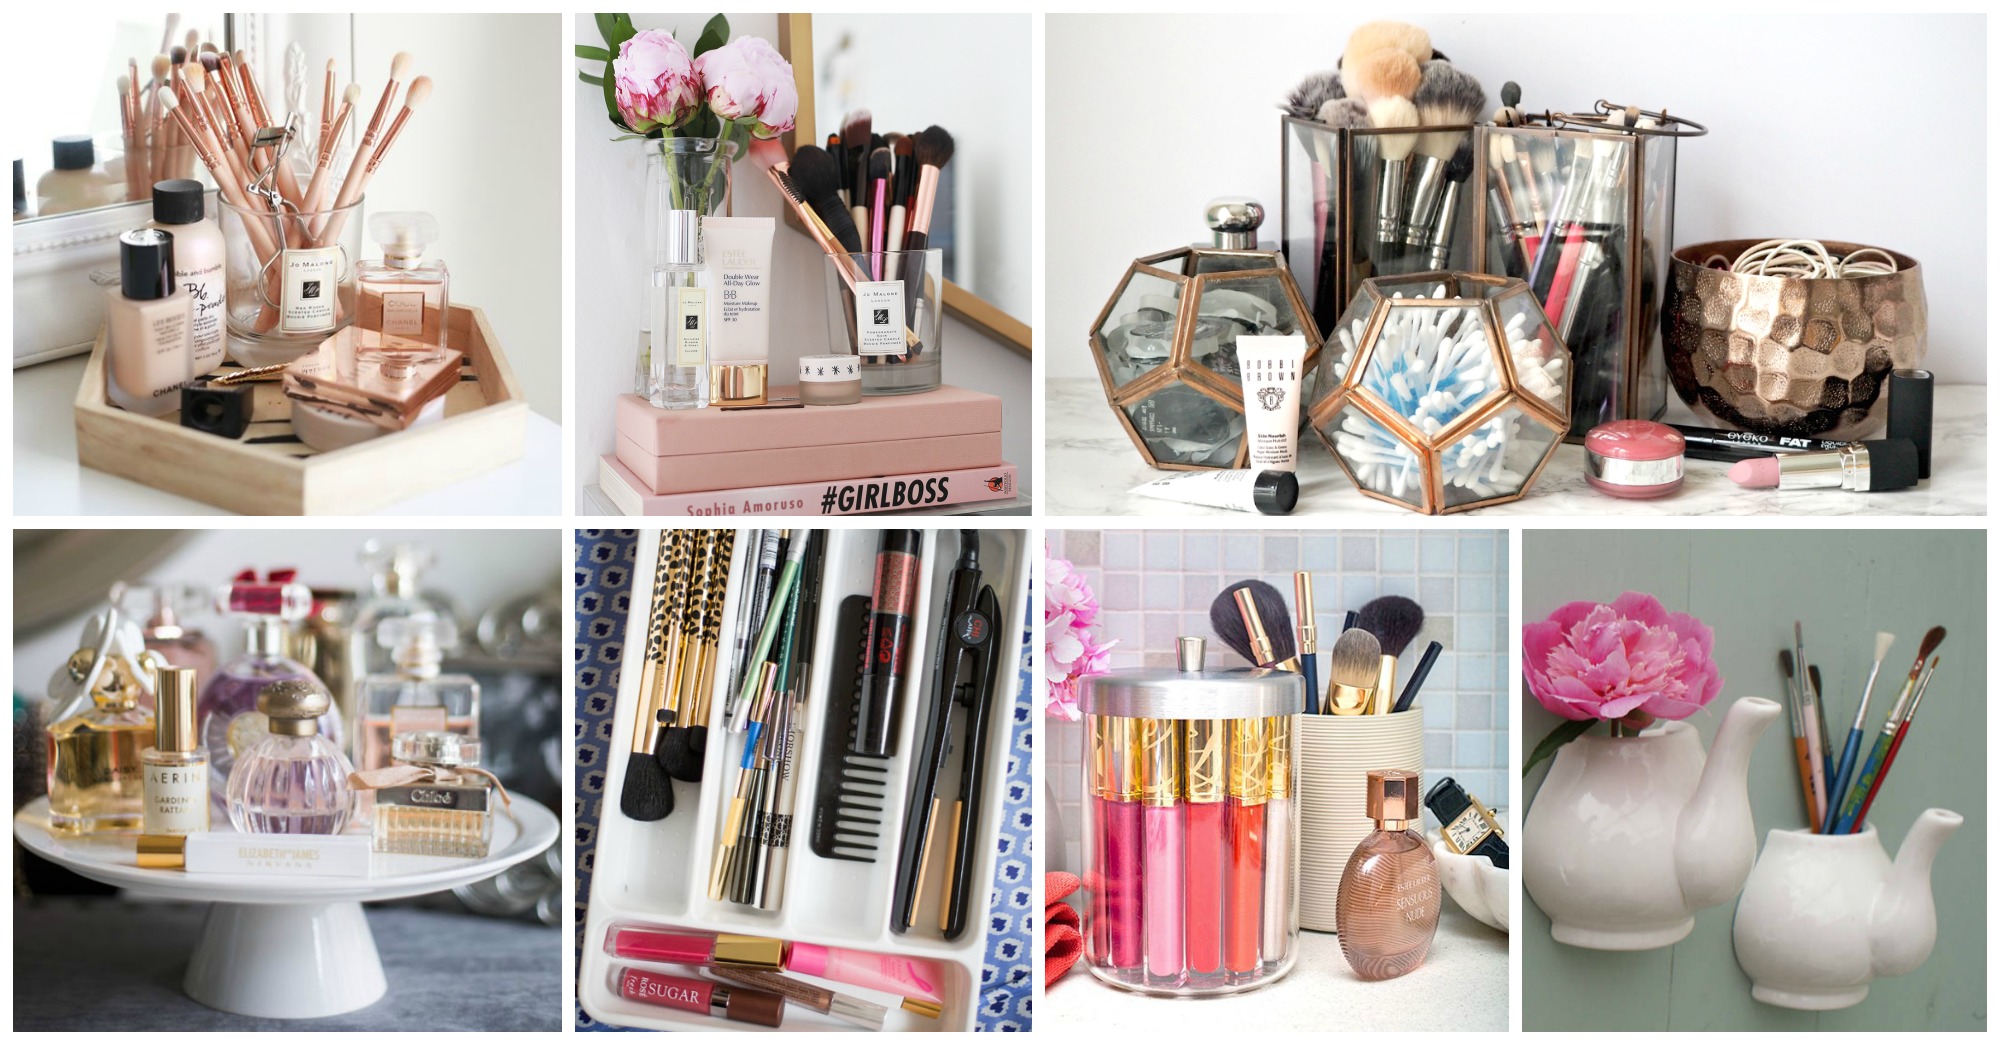 10 Awesome Makeup Storage Solutions You Have to See